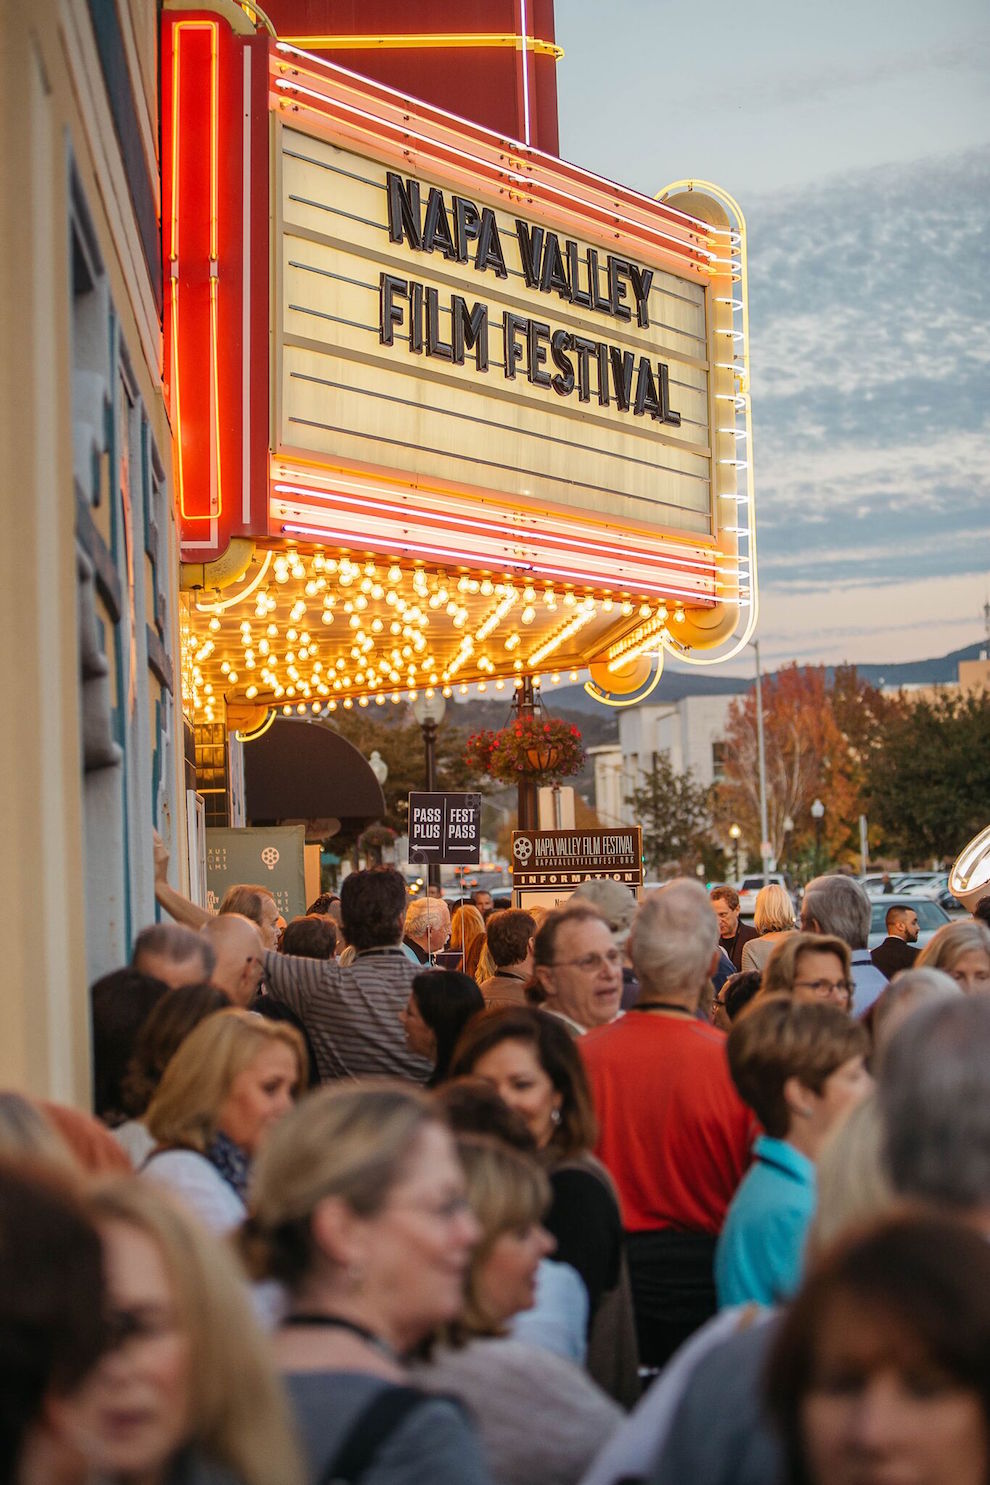 A Preview Of The Napa Valley Film Festival